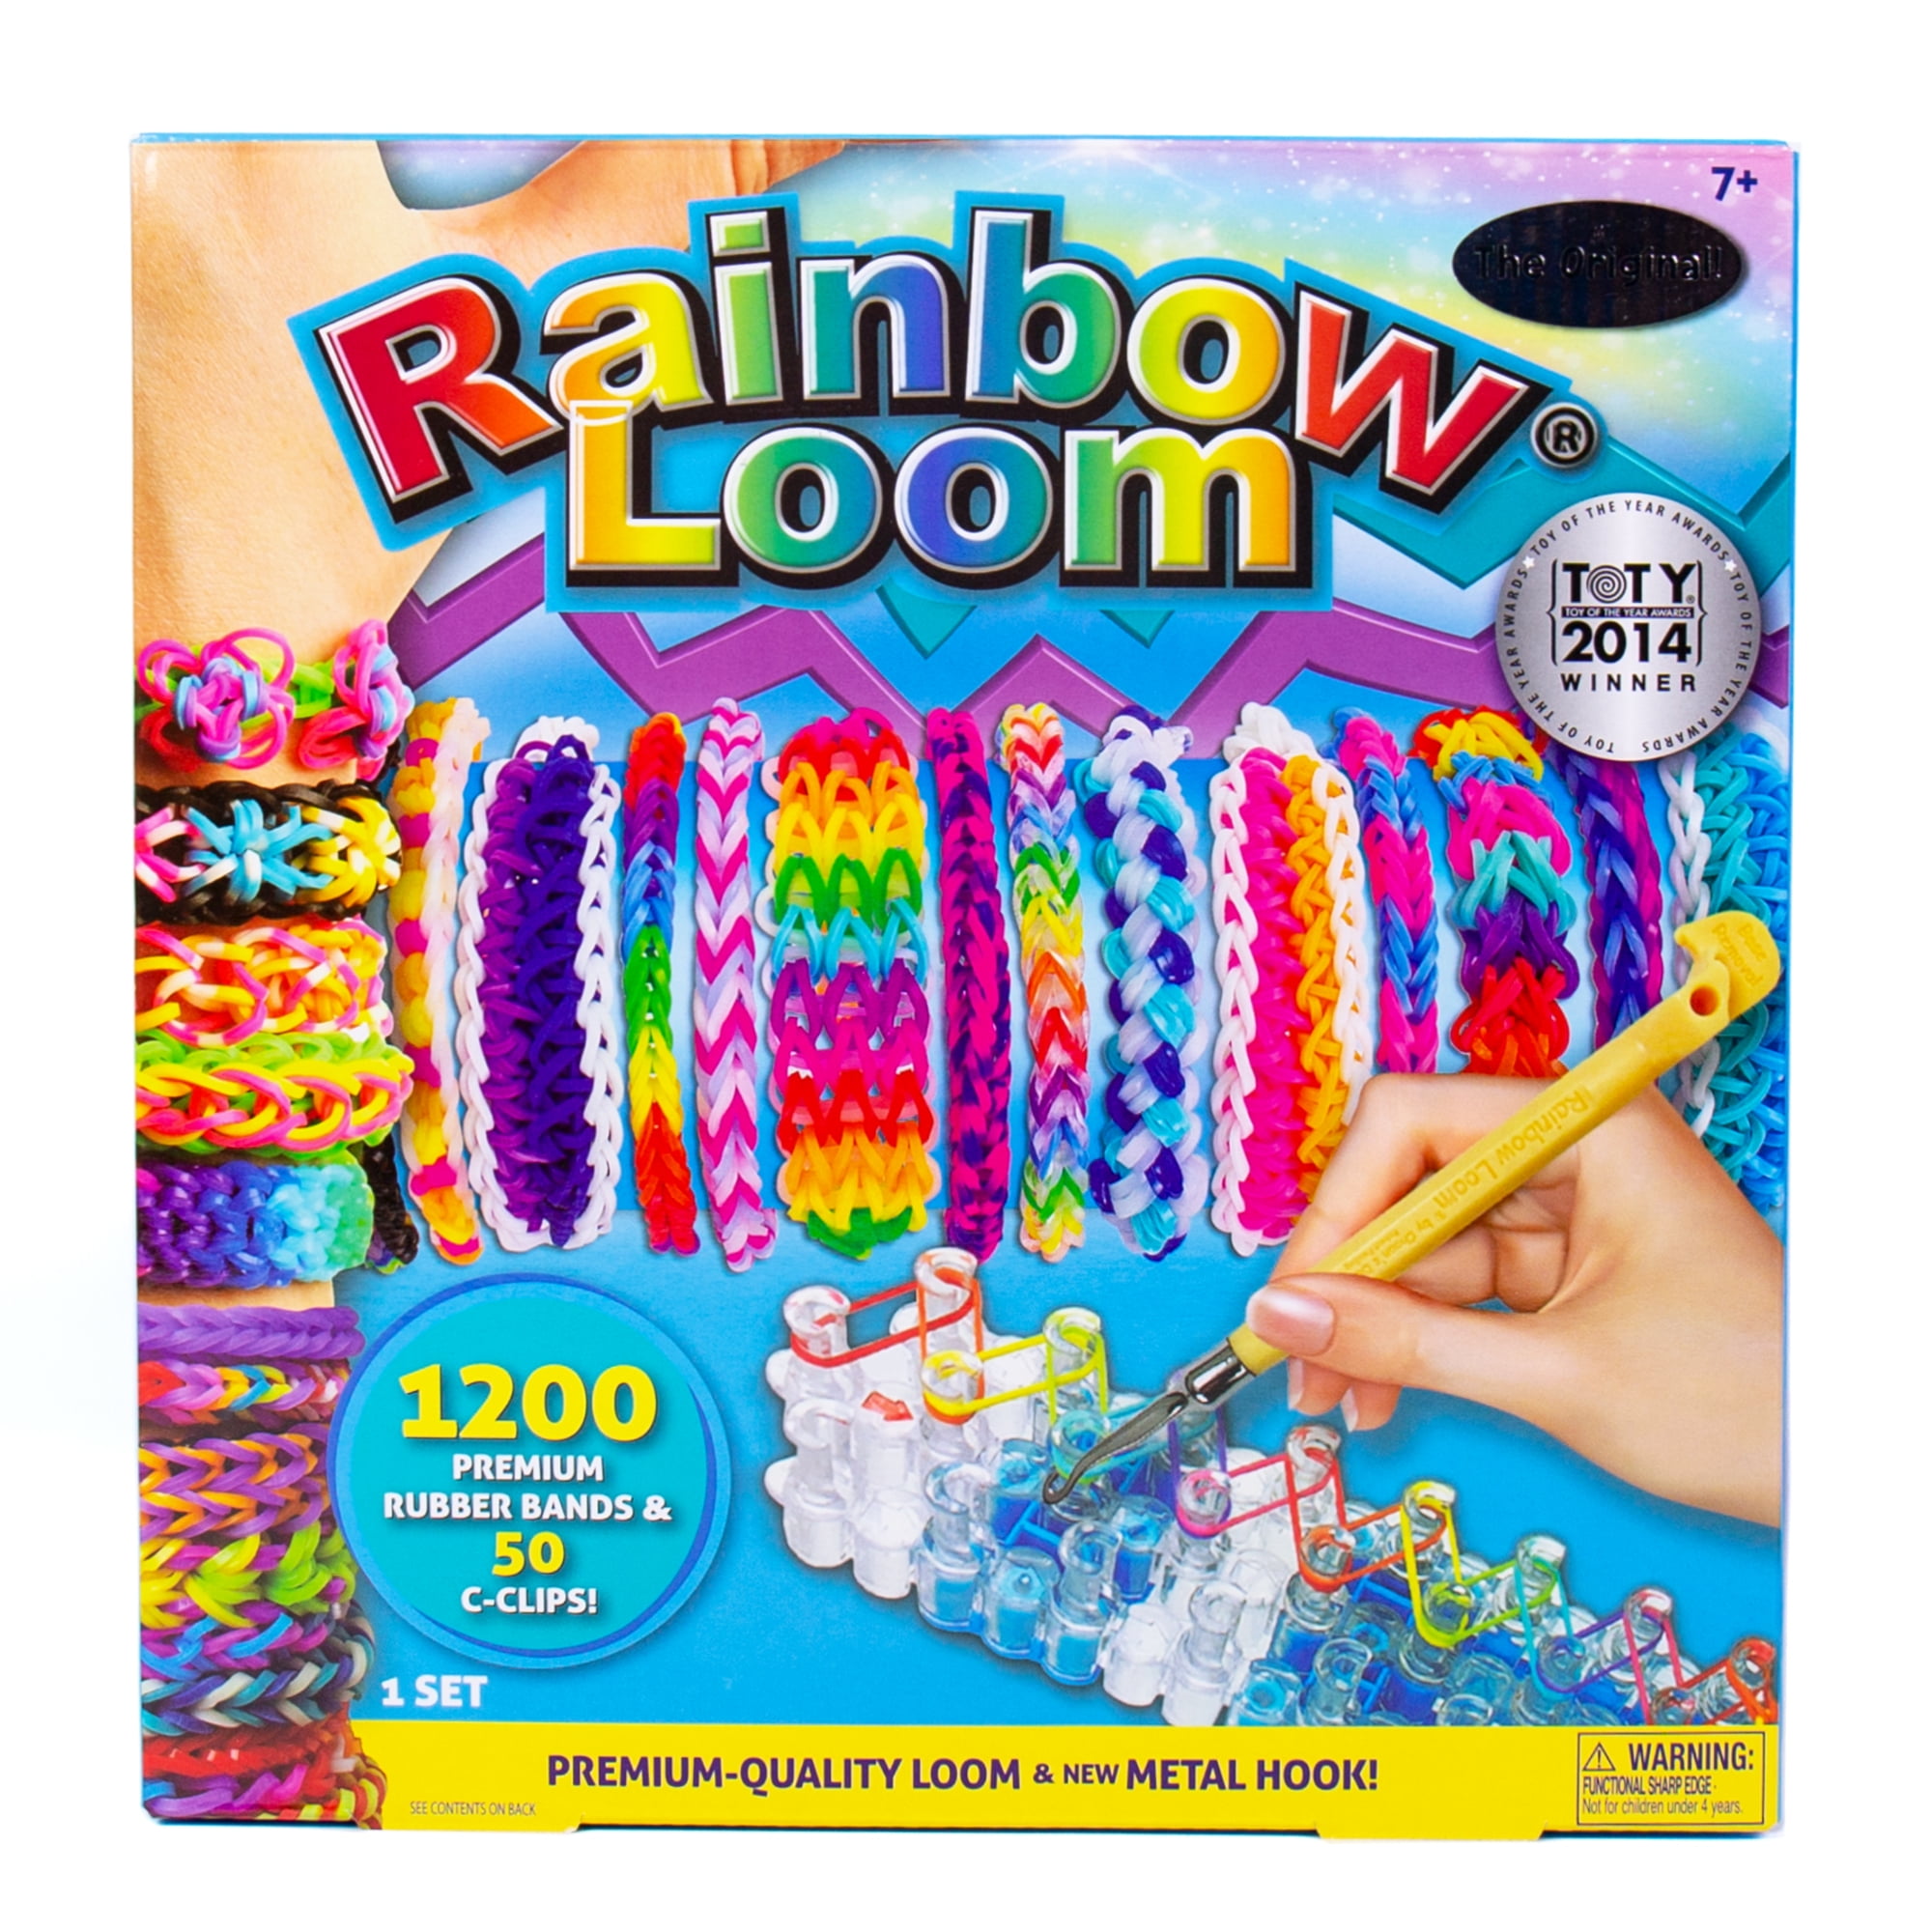 2 bags LOOM RUBBER BANDS REFILL & 50 S-CLIPS RAINBOW 10 Color MIX US SELL 1200 